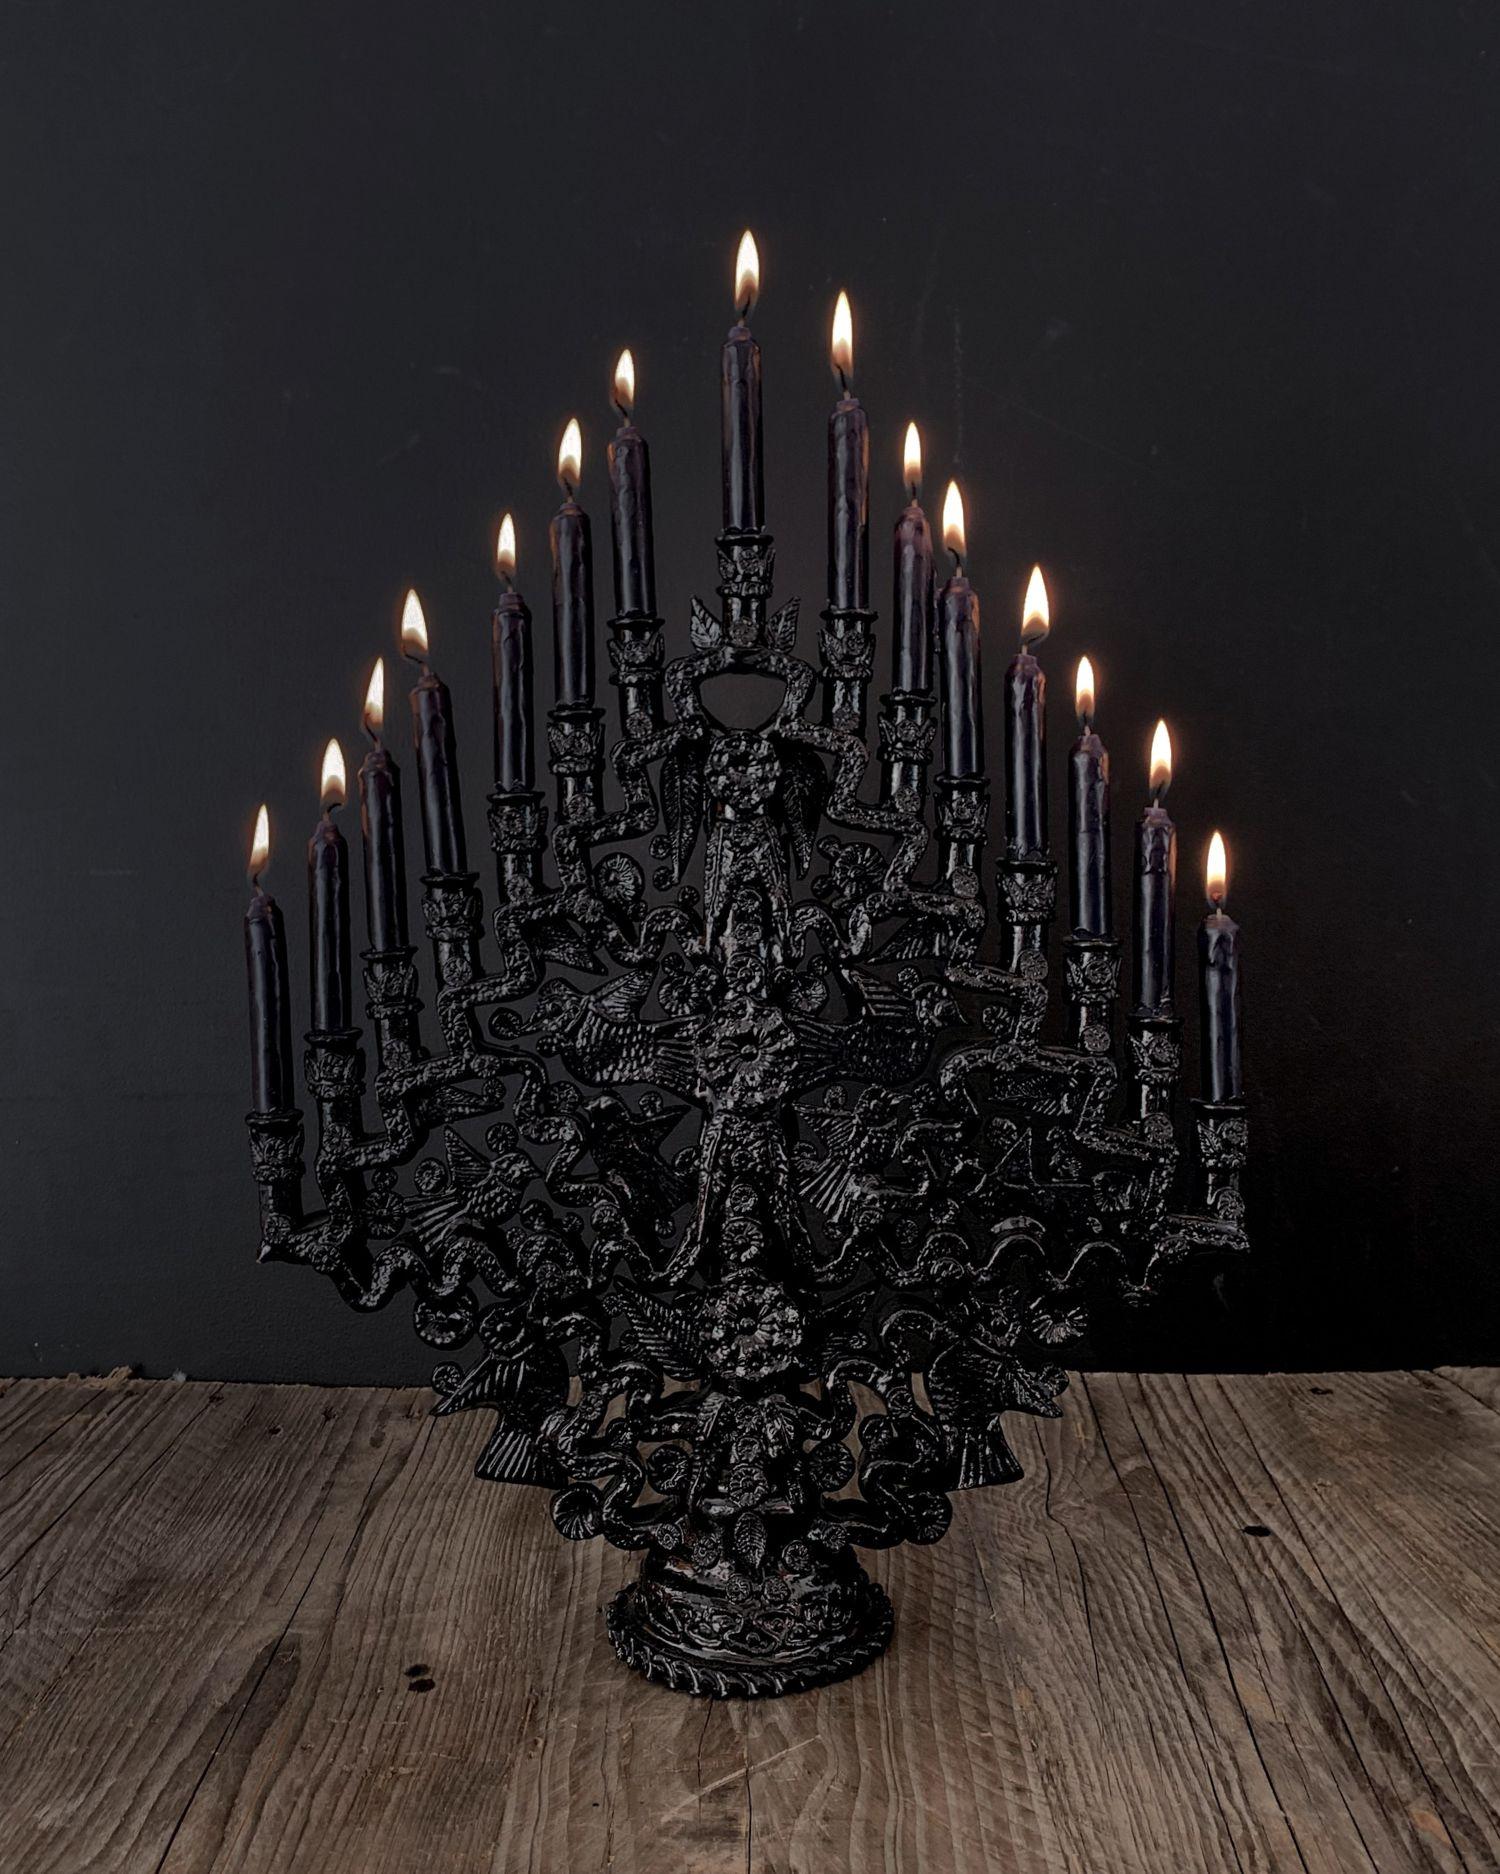 Santa Fe candleholder by Onora
Dimensions: W 62 x H 60 cm
Materials: Clay, glazed pottery

Glazed candelabra crafted in Santa Fe de la Laguna, Michoacán a town near the lake of Pátzcuaro, famous for the Day of the Dead festivities. This candle